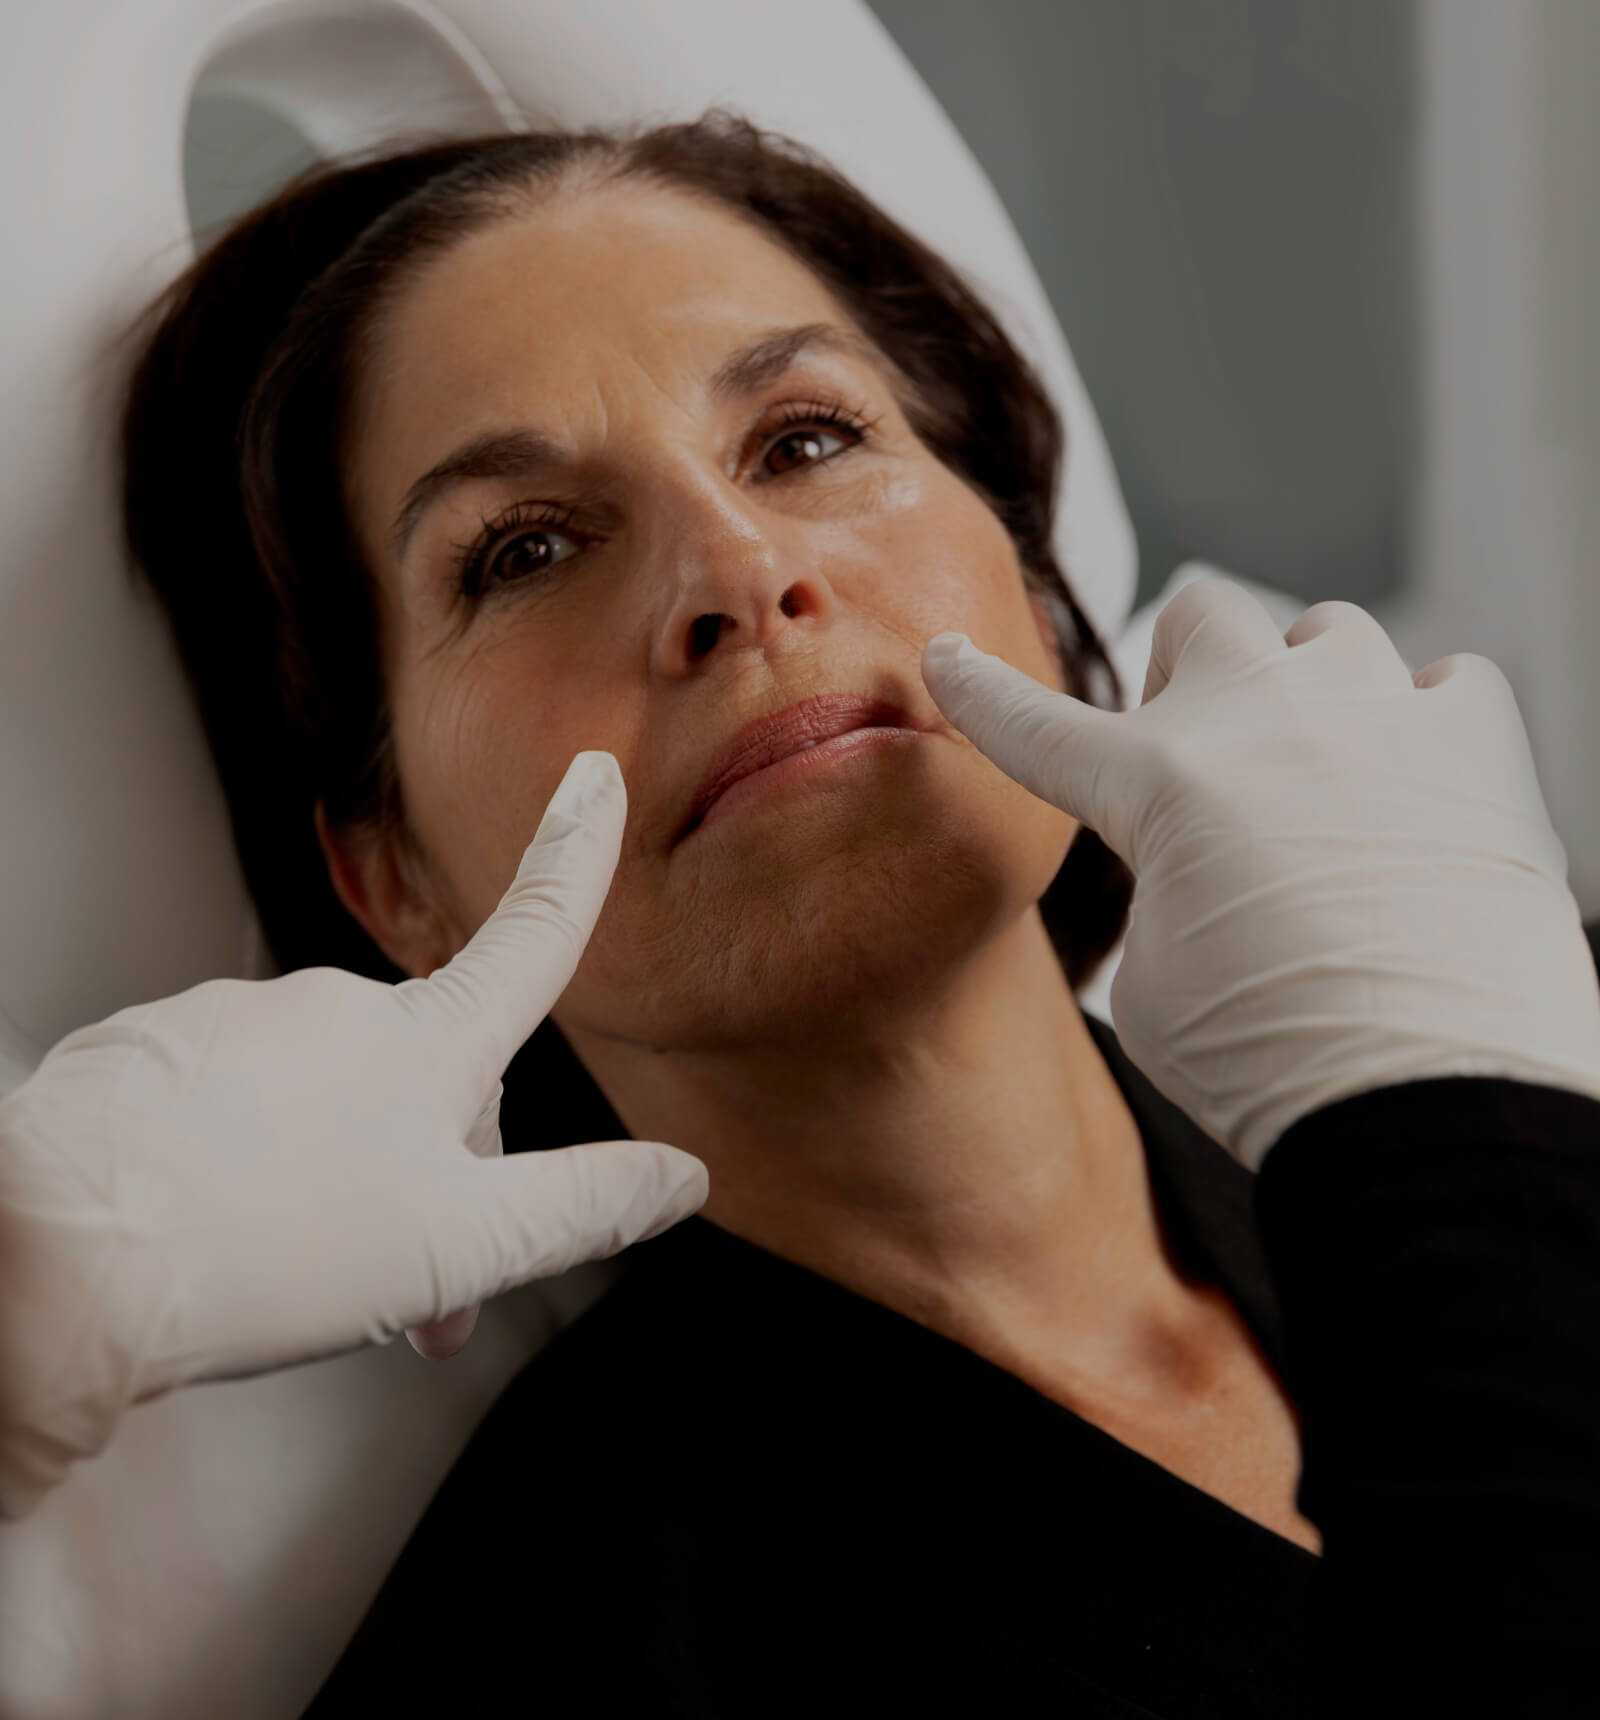 A technician from Clinique Chloé showing the nasolabial folds of a patient with her two fingers